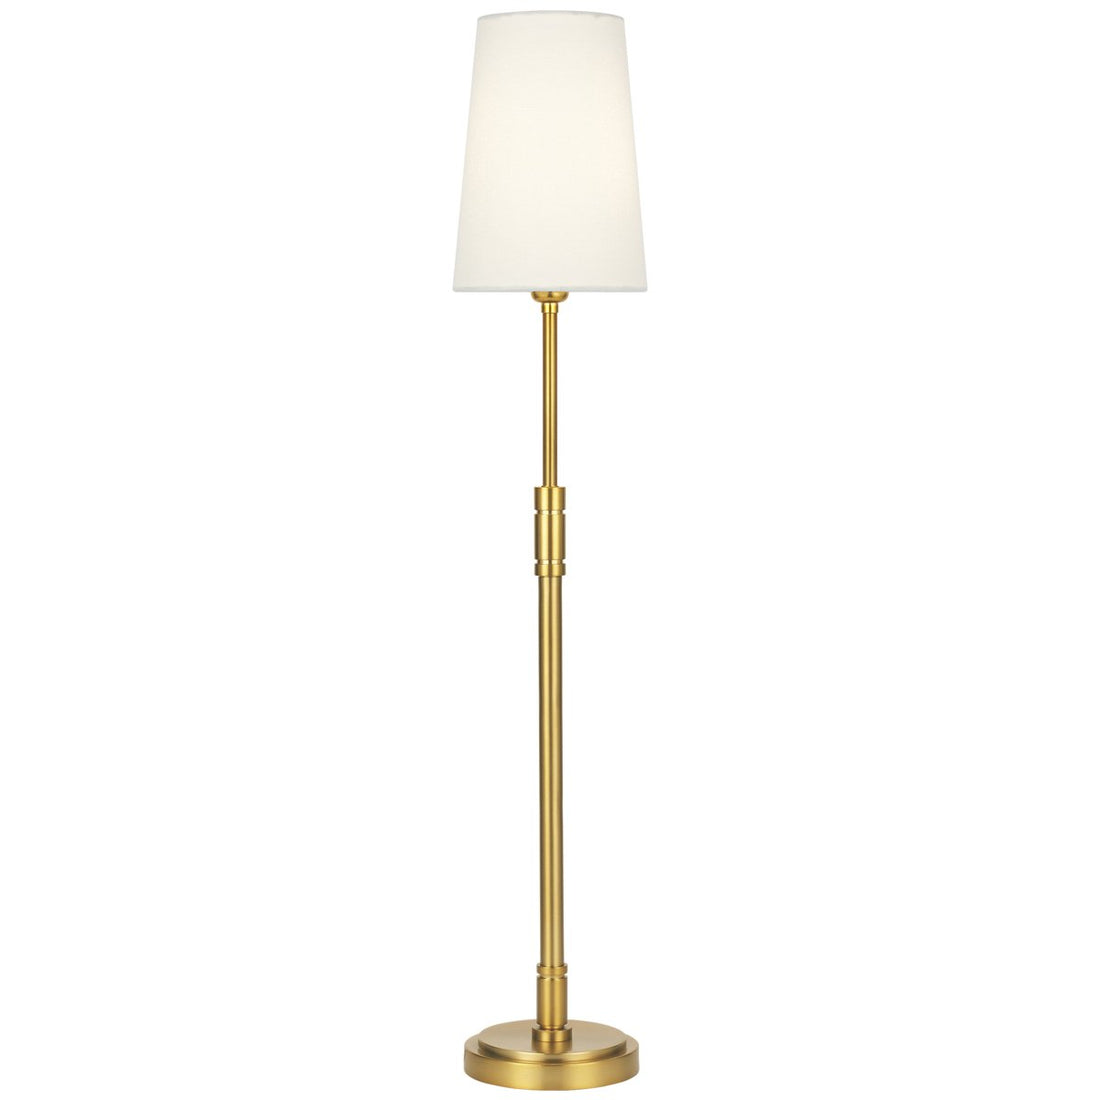 Beckwith 1-Light Table Lamp